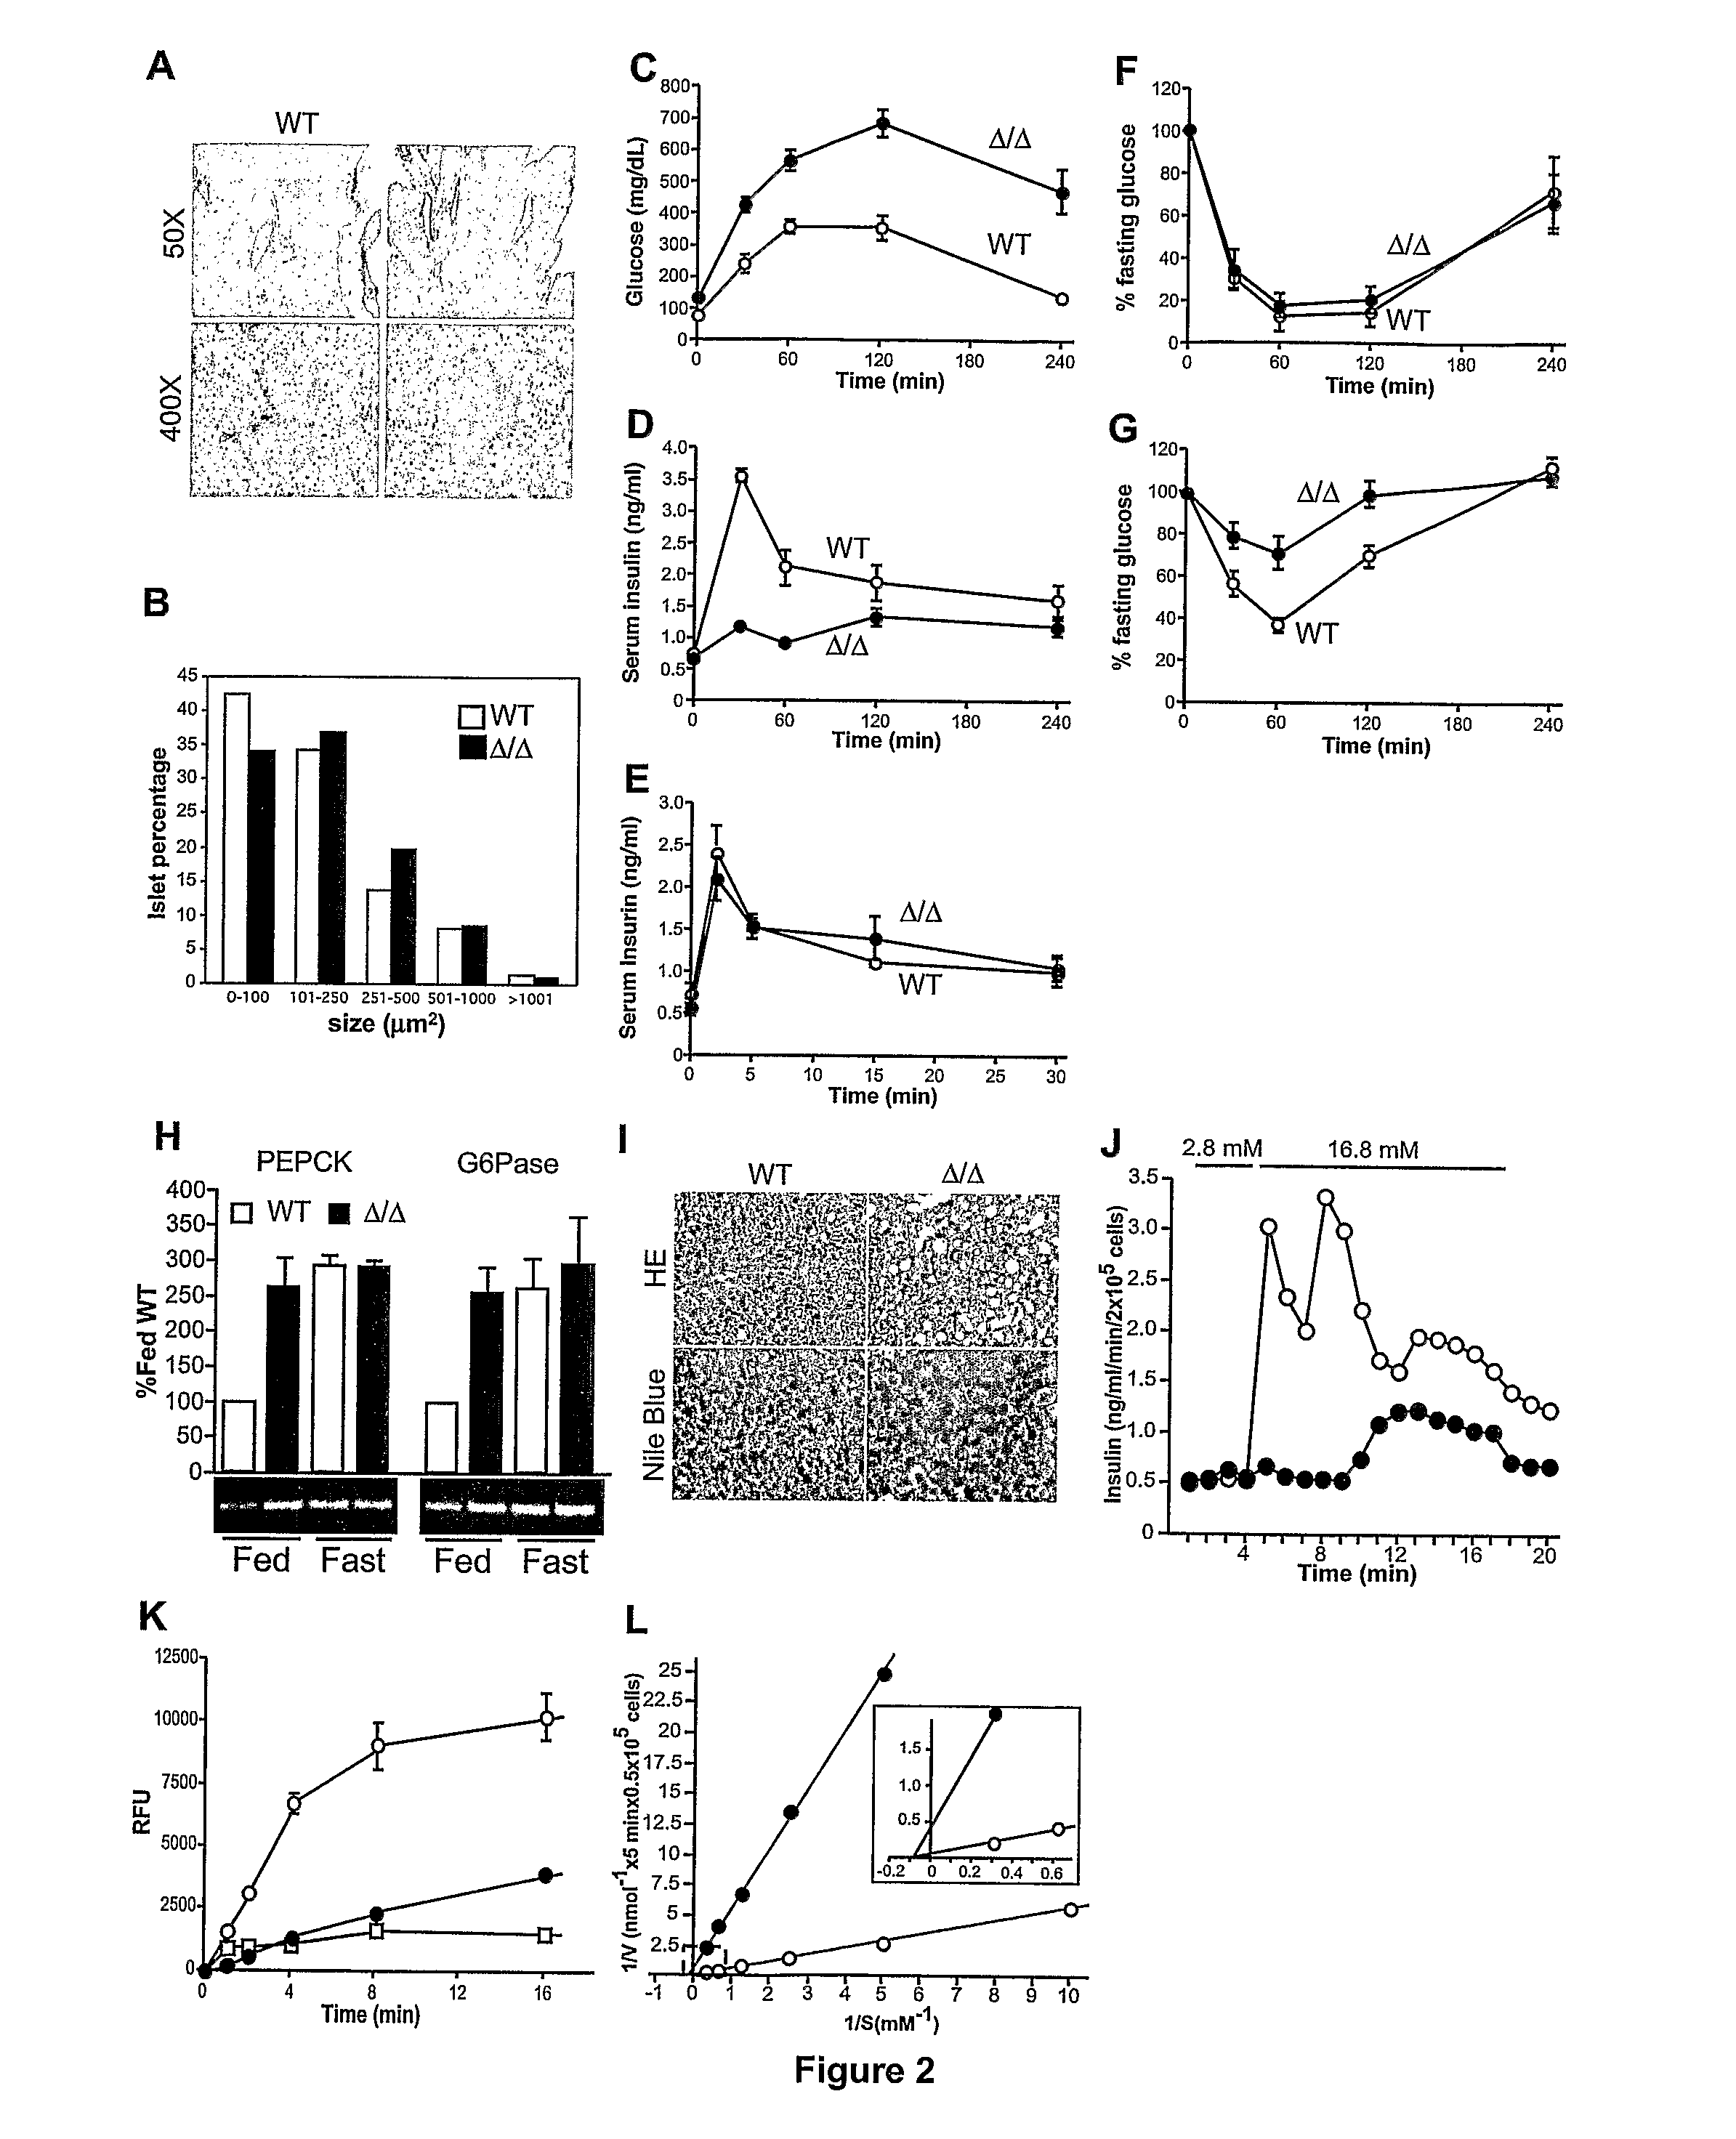 Regulation of glucose and insulin levels by GnT-4 glycosyltransferase activity